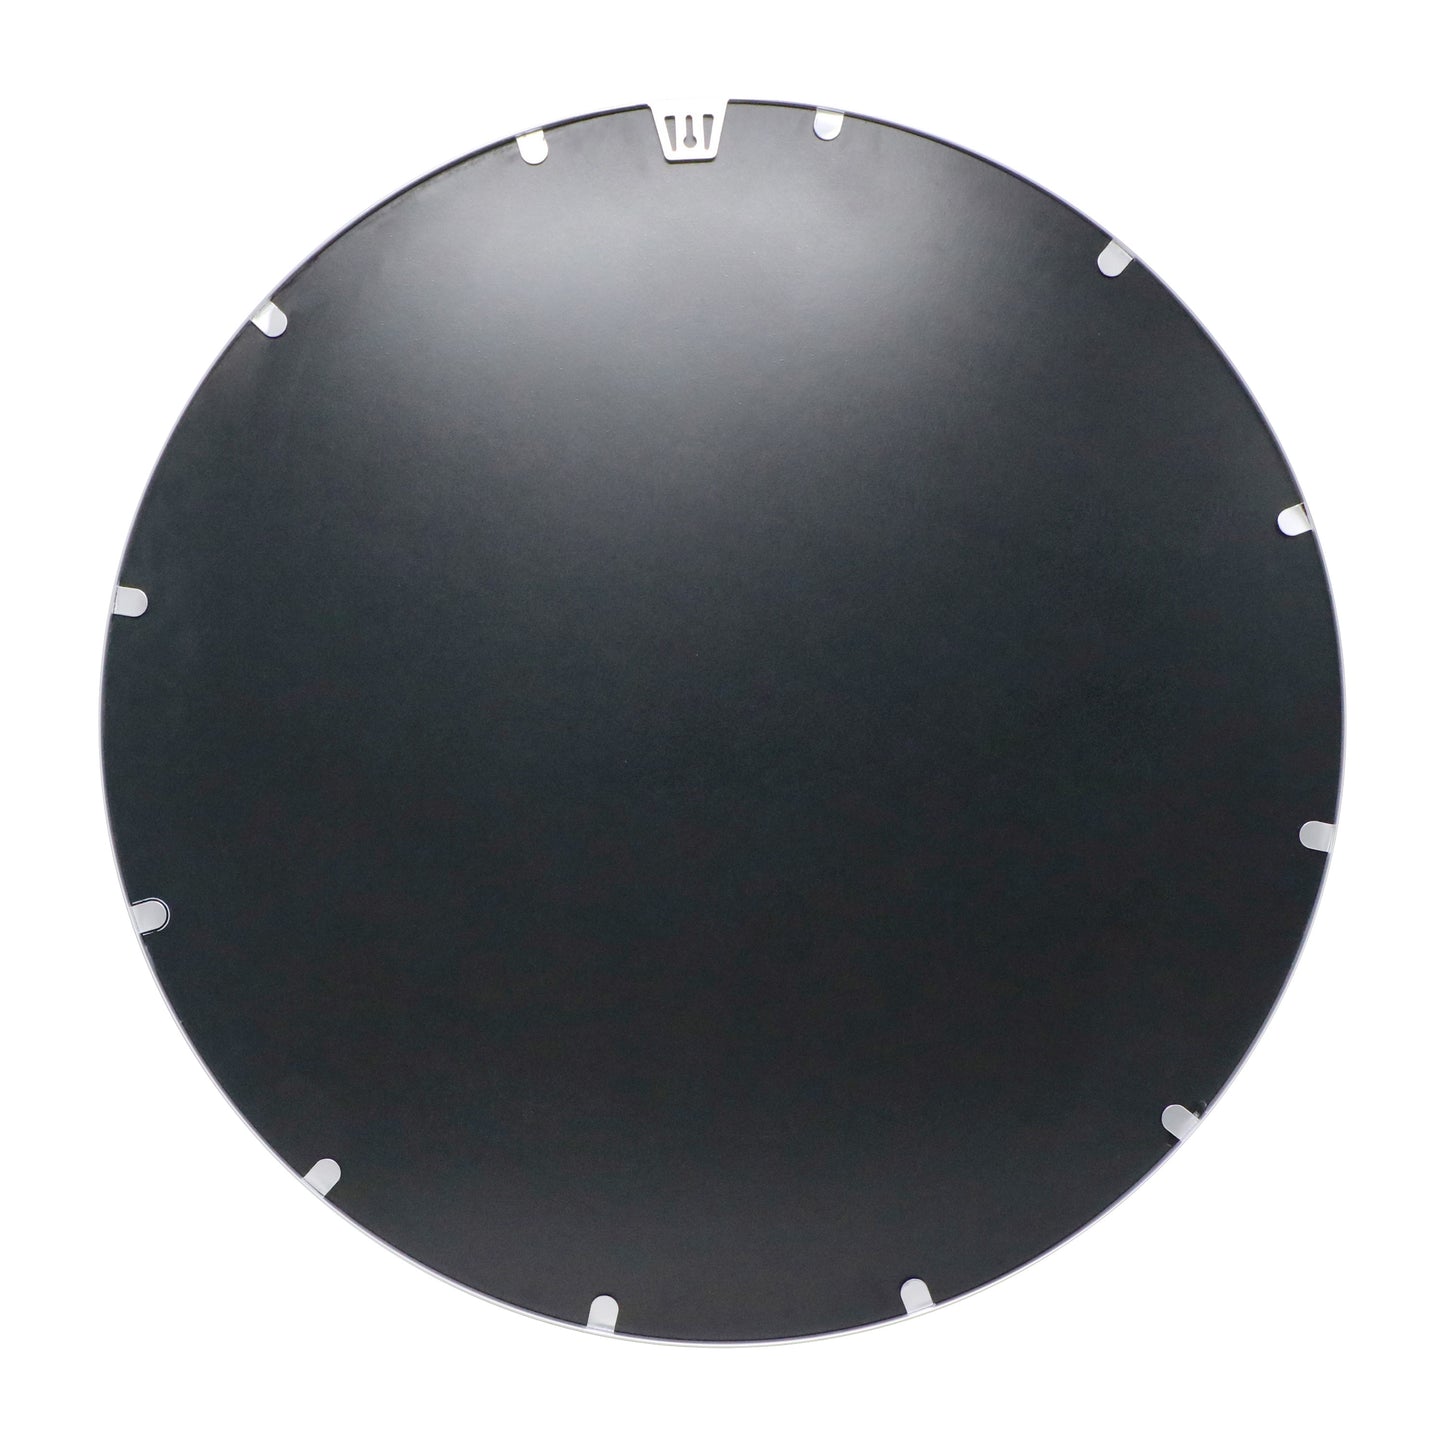 Silver 36" Round Wall Mirror HFKHD-6GD-CRE8-202315-GG